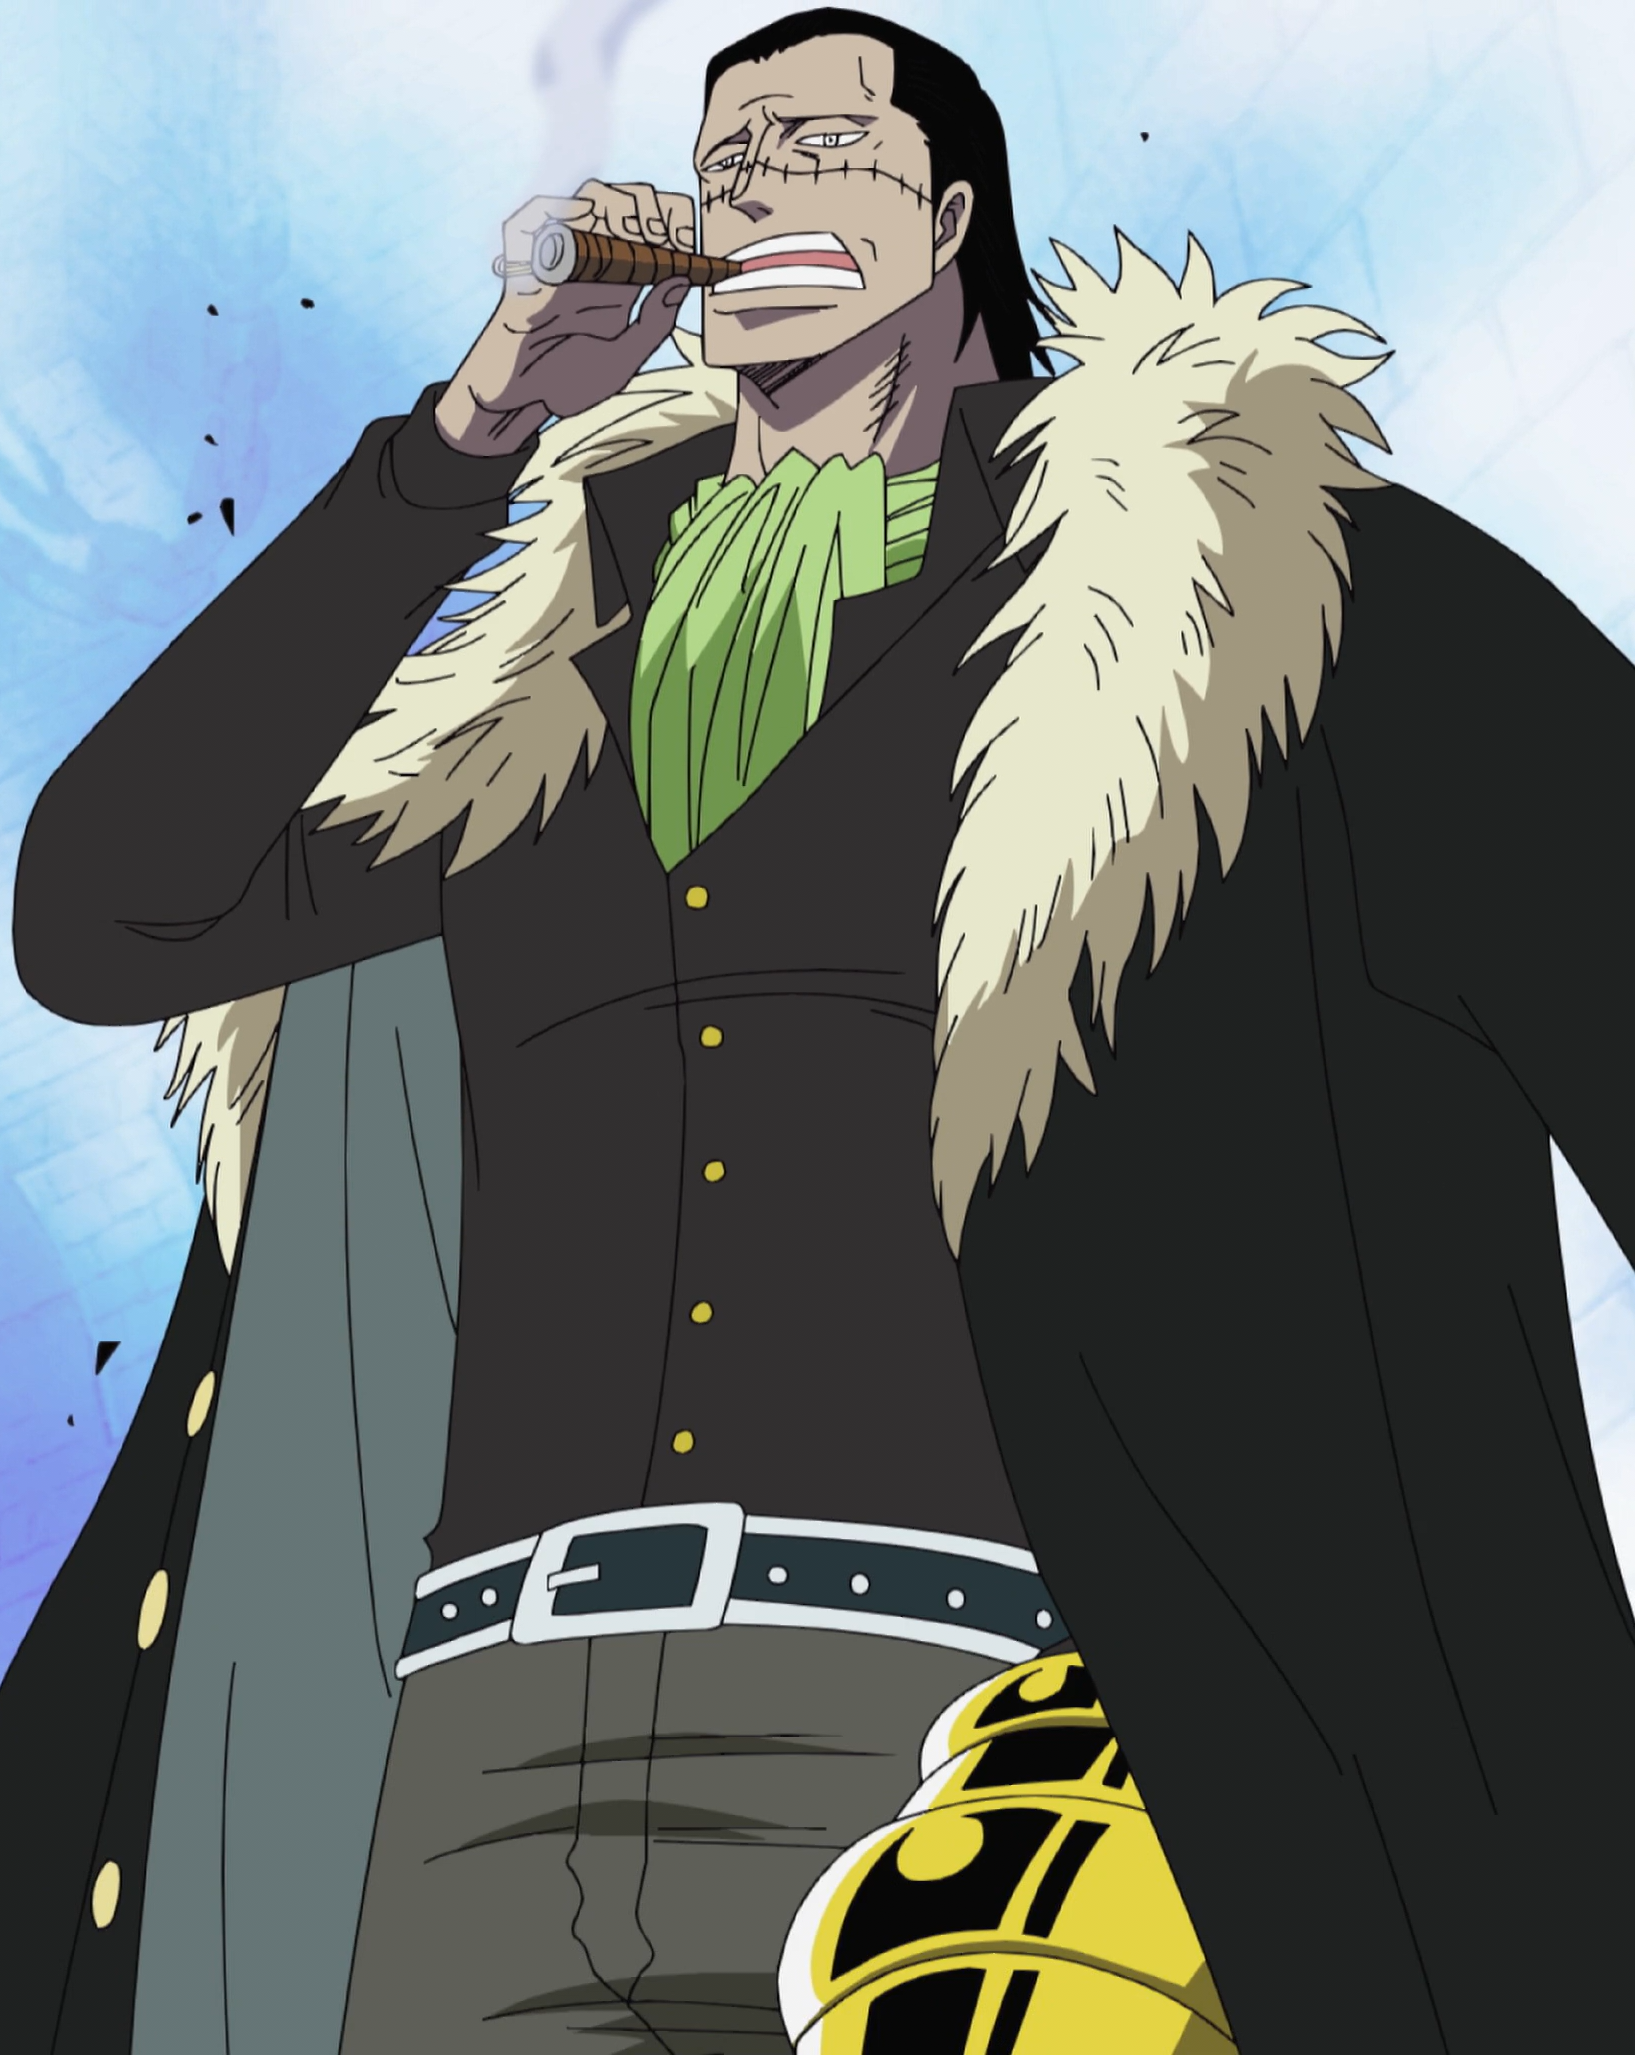 http://vignette1.wikia.nocookie.net/onepiece/images/f/fd/Crocodile_Anime_Infobox.png/revision/latest?cb=20131221150142